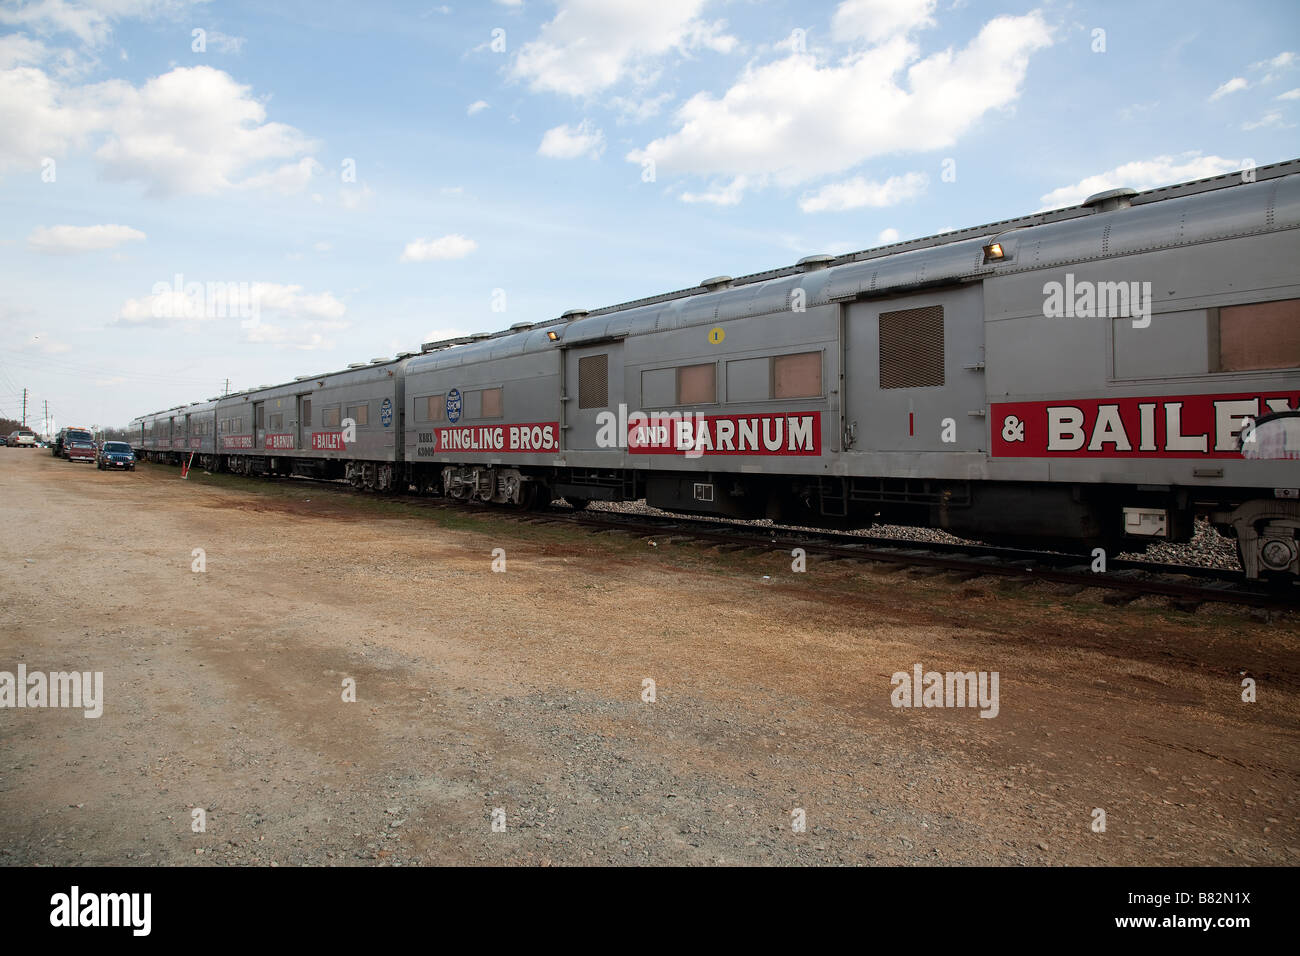 Cars from the Ringling Brothers and Barnum Bailey circus train which carries elephants and other large animals  Stock Photo